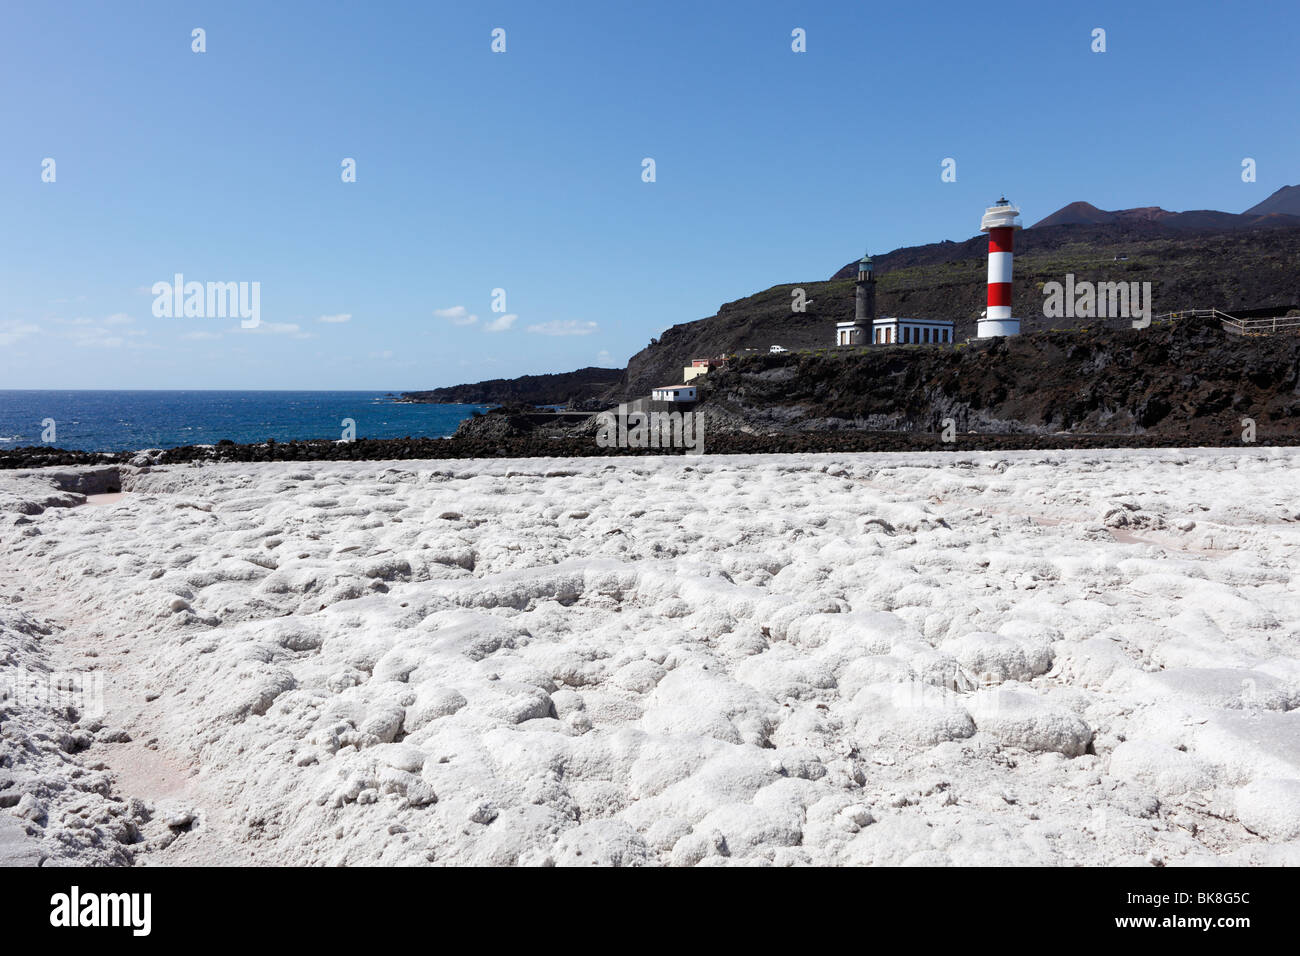 Teneguía Saline and lighthouses, old and new, Faro de Fuencaliente, La Palma, Canary Islands, Spain, Europe Stock Photo